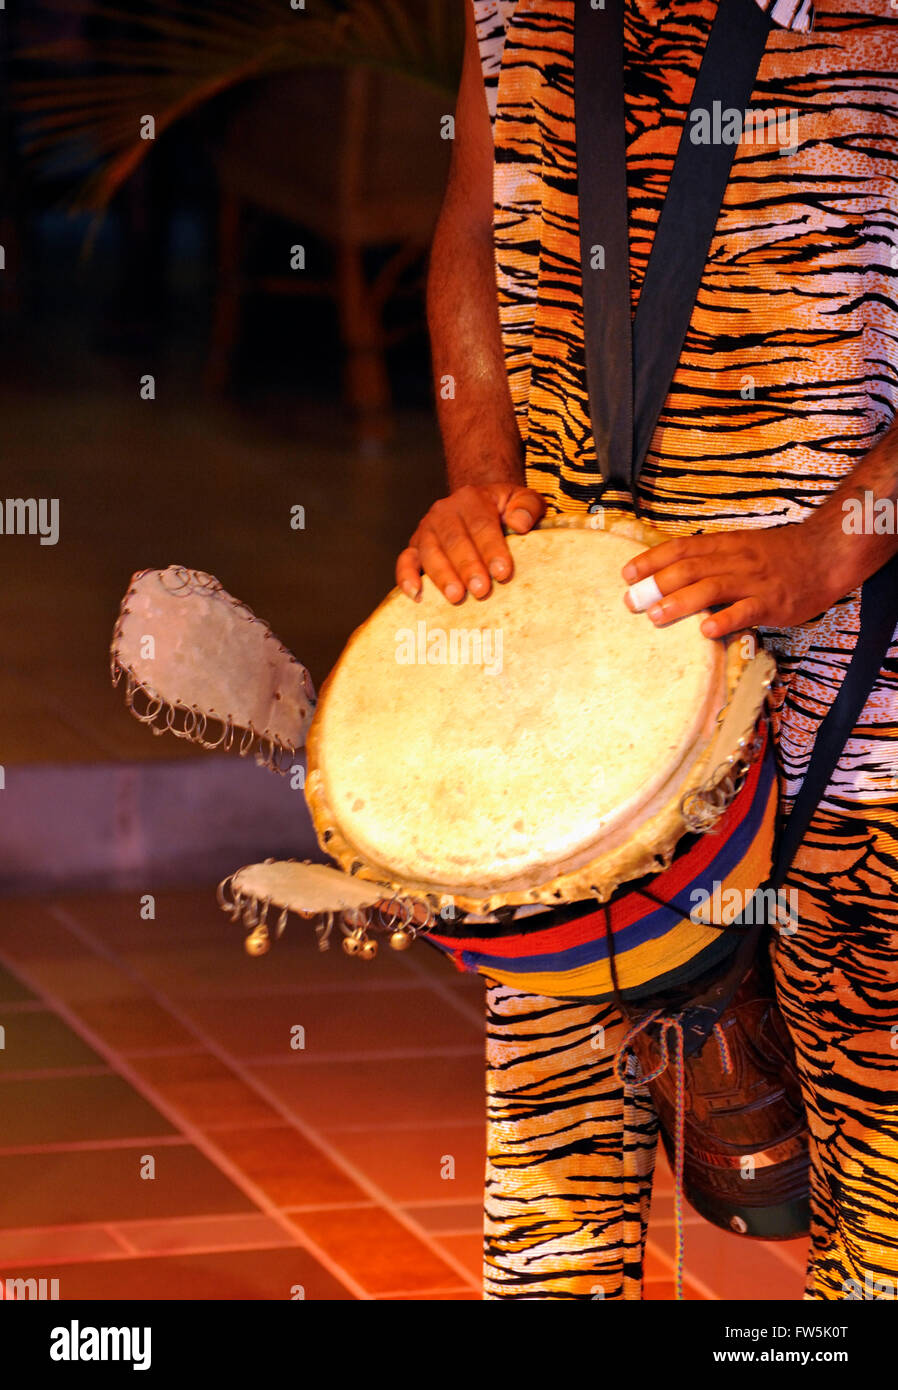 Mauritian djembe / djumbe drum with ears; from South-west Africa; sangban (medium drum). Note the 'ears' that rattle. Sega is the national song and dance of Mauritius, extremely versatile. Accompanied by distinct instruments providing rhythm only without melody, such as the ravane (a thin, wide drum of goat's skin), the maravane (pebble-filled box rattling when shaken) and the triangle, the singer sings about the tribulations of love or the humorous side of life. Stock Photo